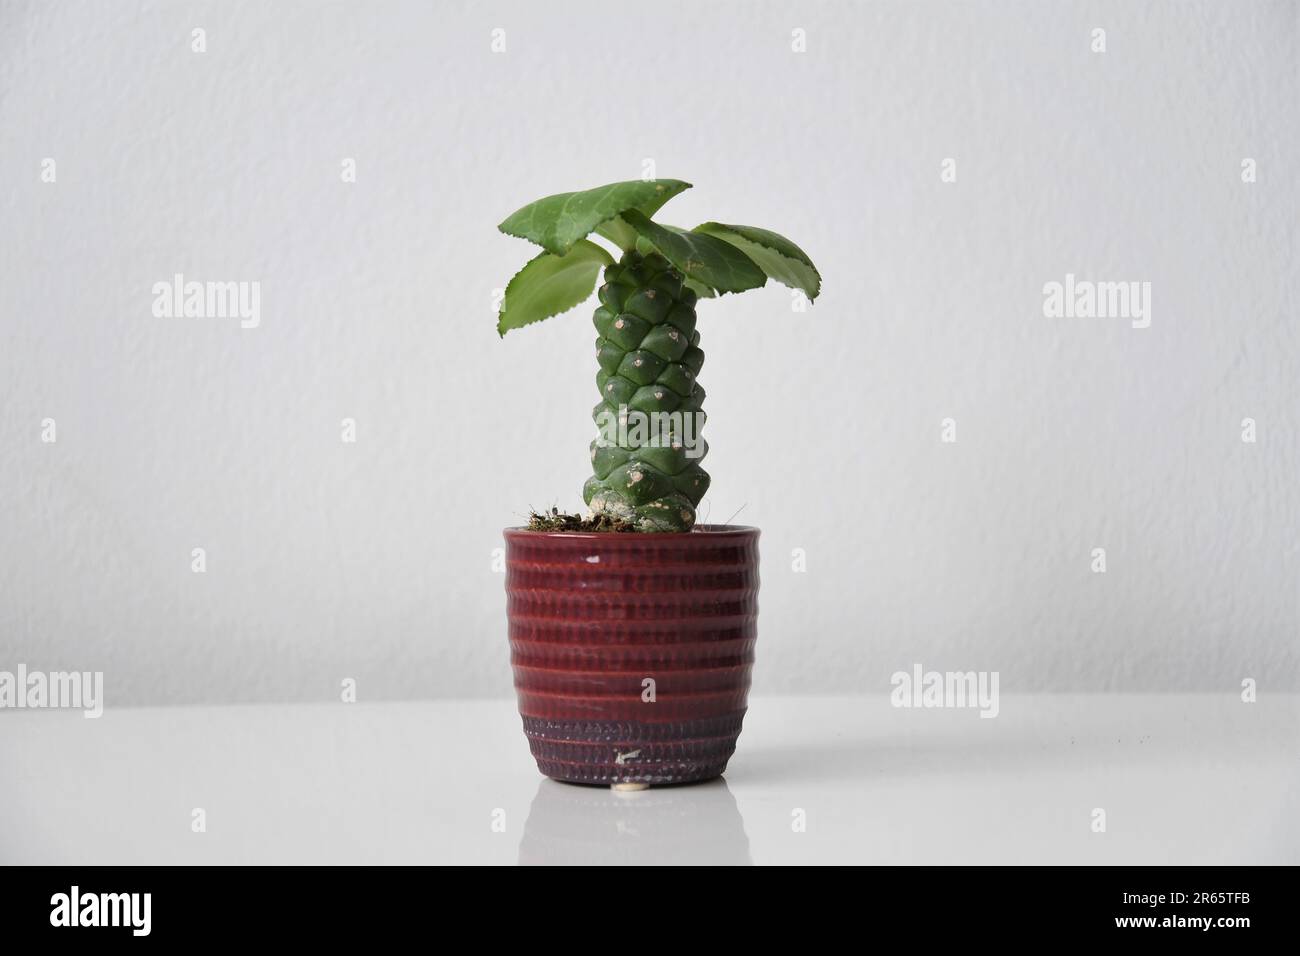 Euphorbia ritchiei (Monadenium ritchiei) houseplant in a red pot, isoalted on a white background. Green succulent cactus with leaves. Stock Photo